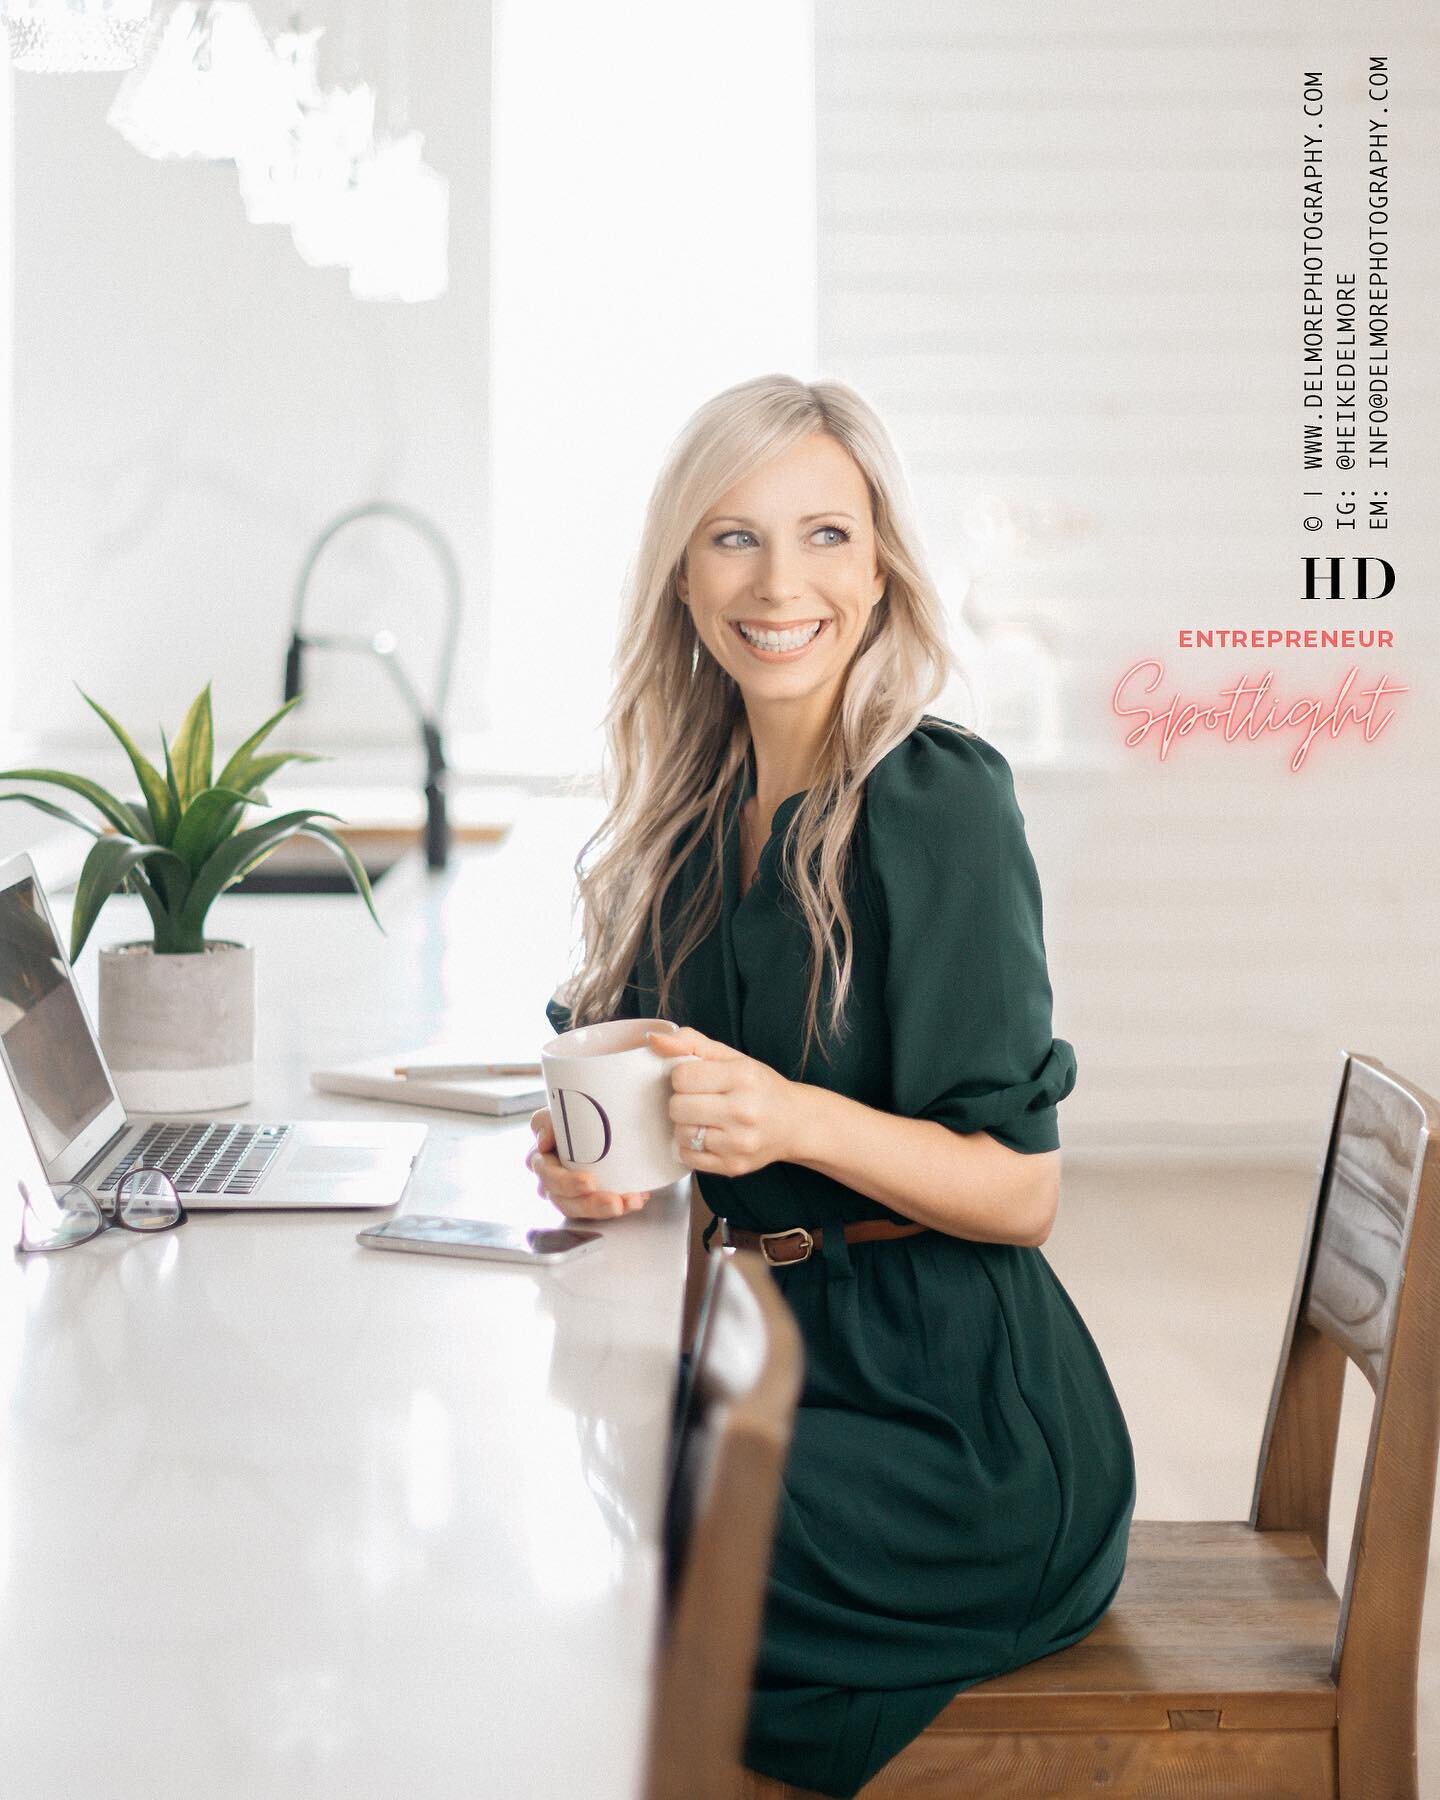 Entrepreneur Spotlight Series⁠
{ Let's support one another }⁠
.⁠
Introducing Dr. Tracy Dalgleish, Relationship Expert, Author, Speaker, and Podcaster.⁠
⁠
Q. Why did you start your business?⁠⁠
A. I wanted to be aligned with what truly mattered to me -